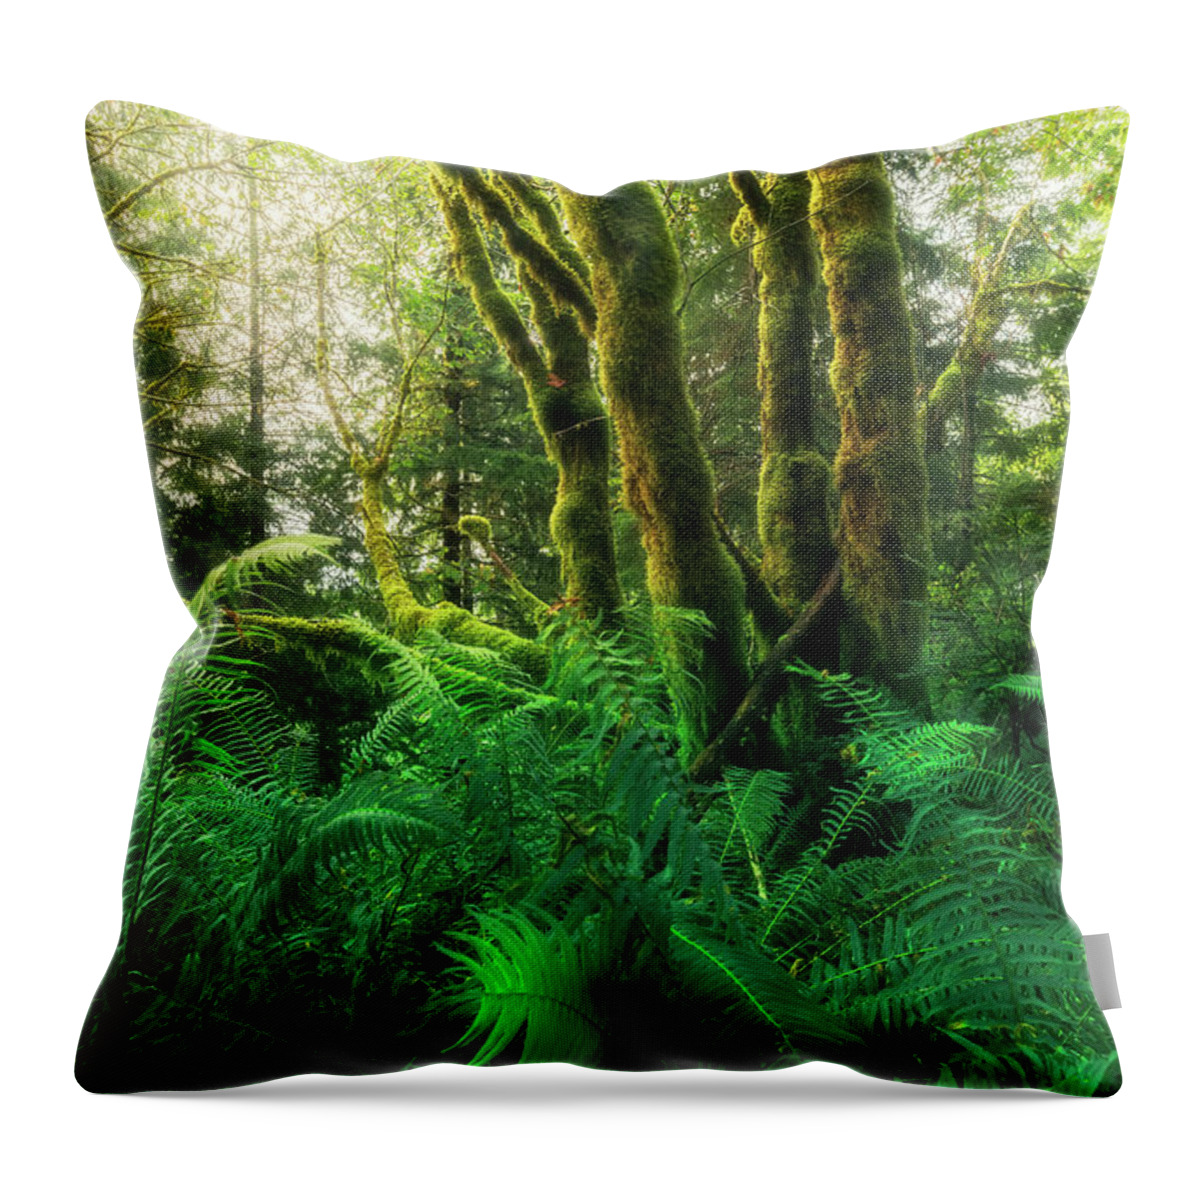 Oregon Coast Throw Pillow featuring the photograph Moss-covered trees with ferns by Masako Metz